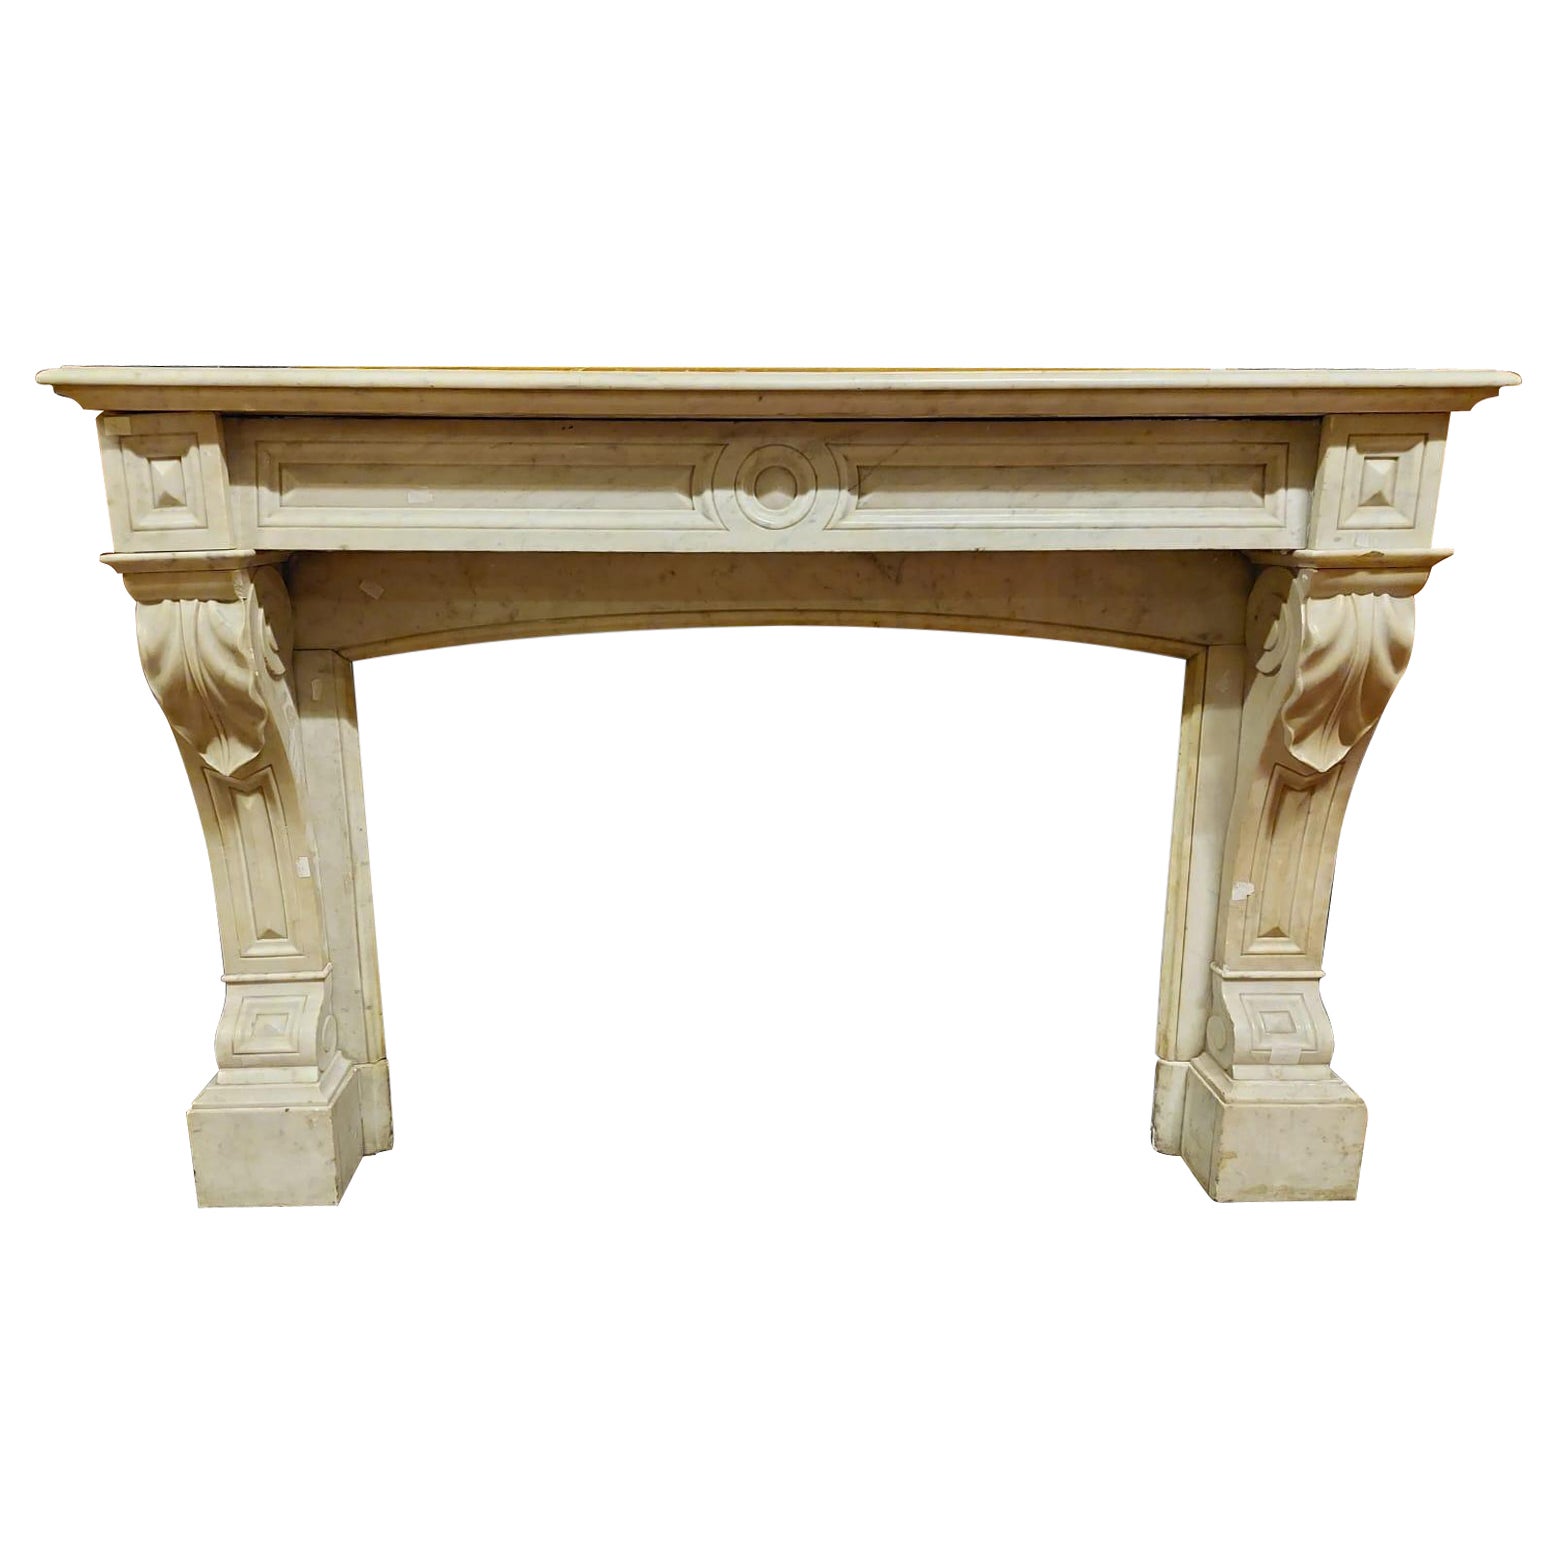 Mantel fireplace, carved in white Carrara marble, 19th century France